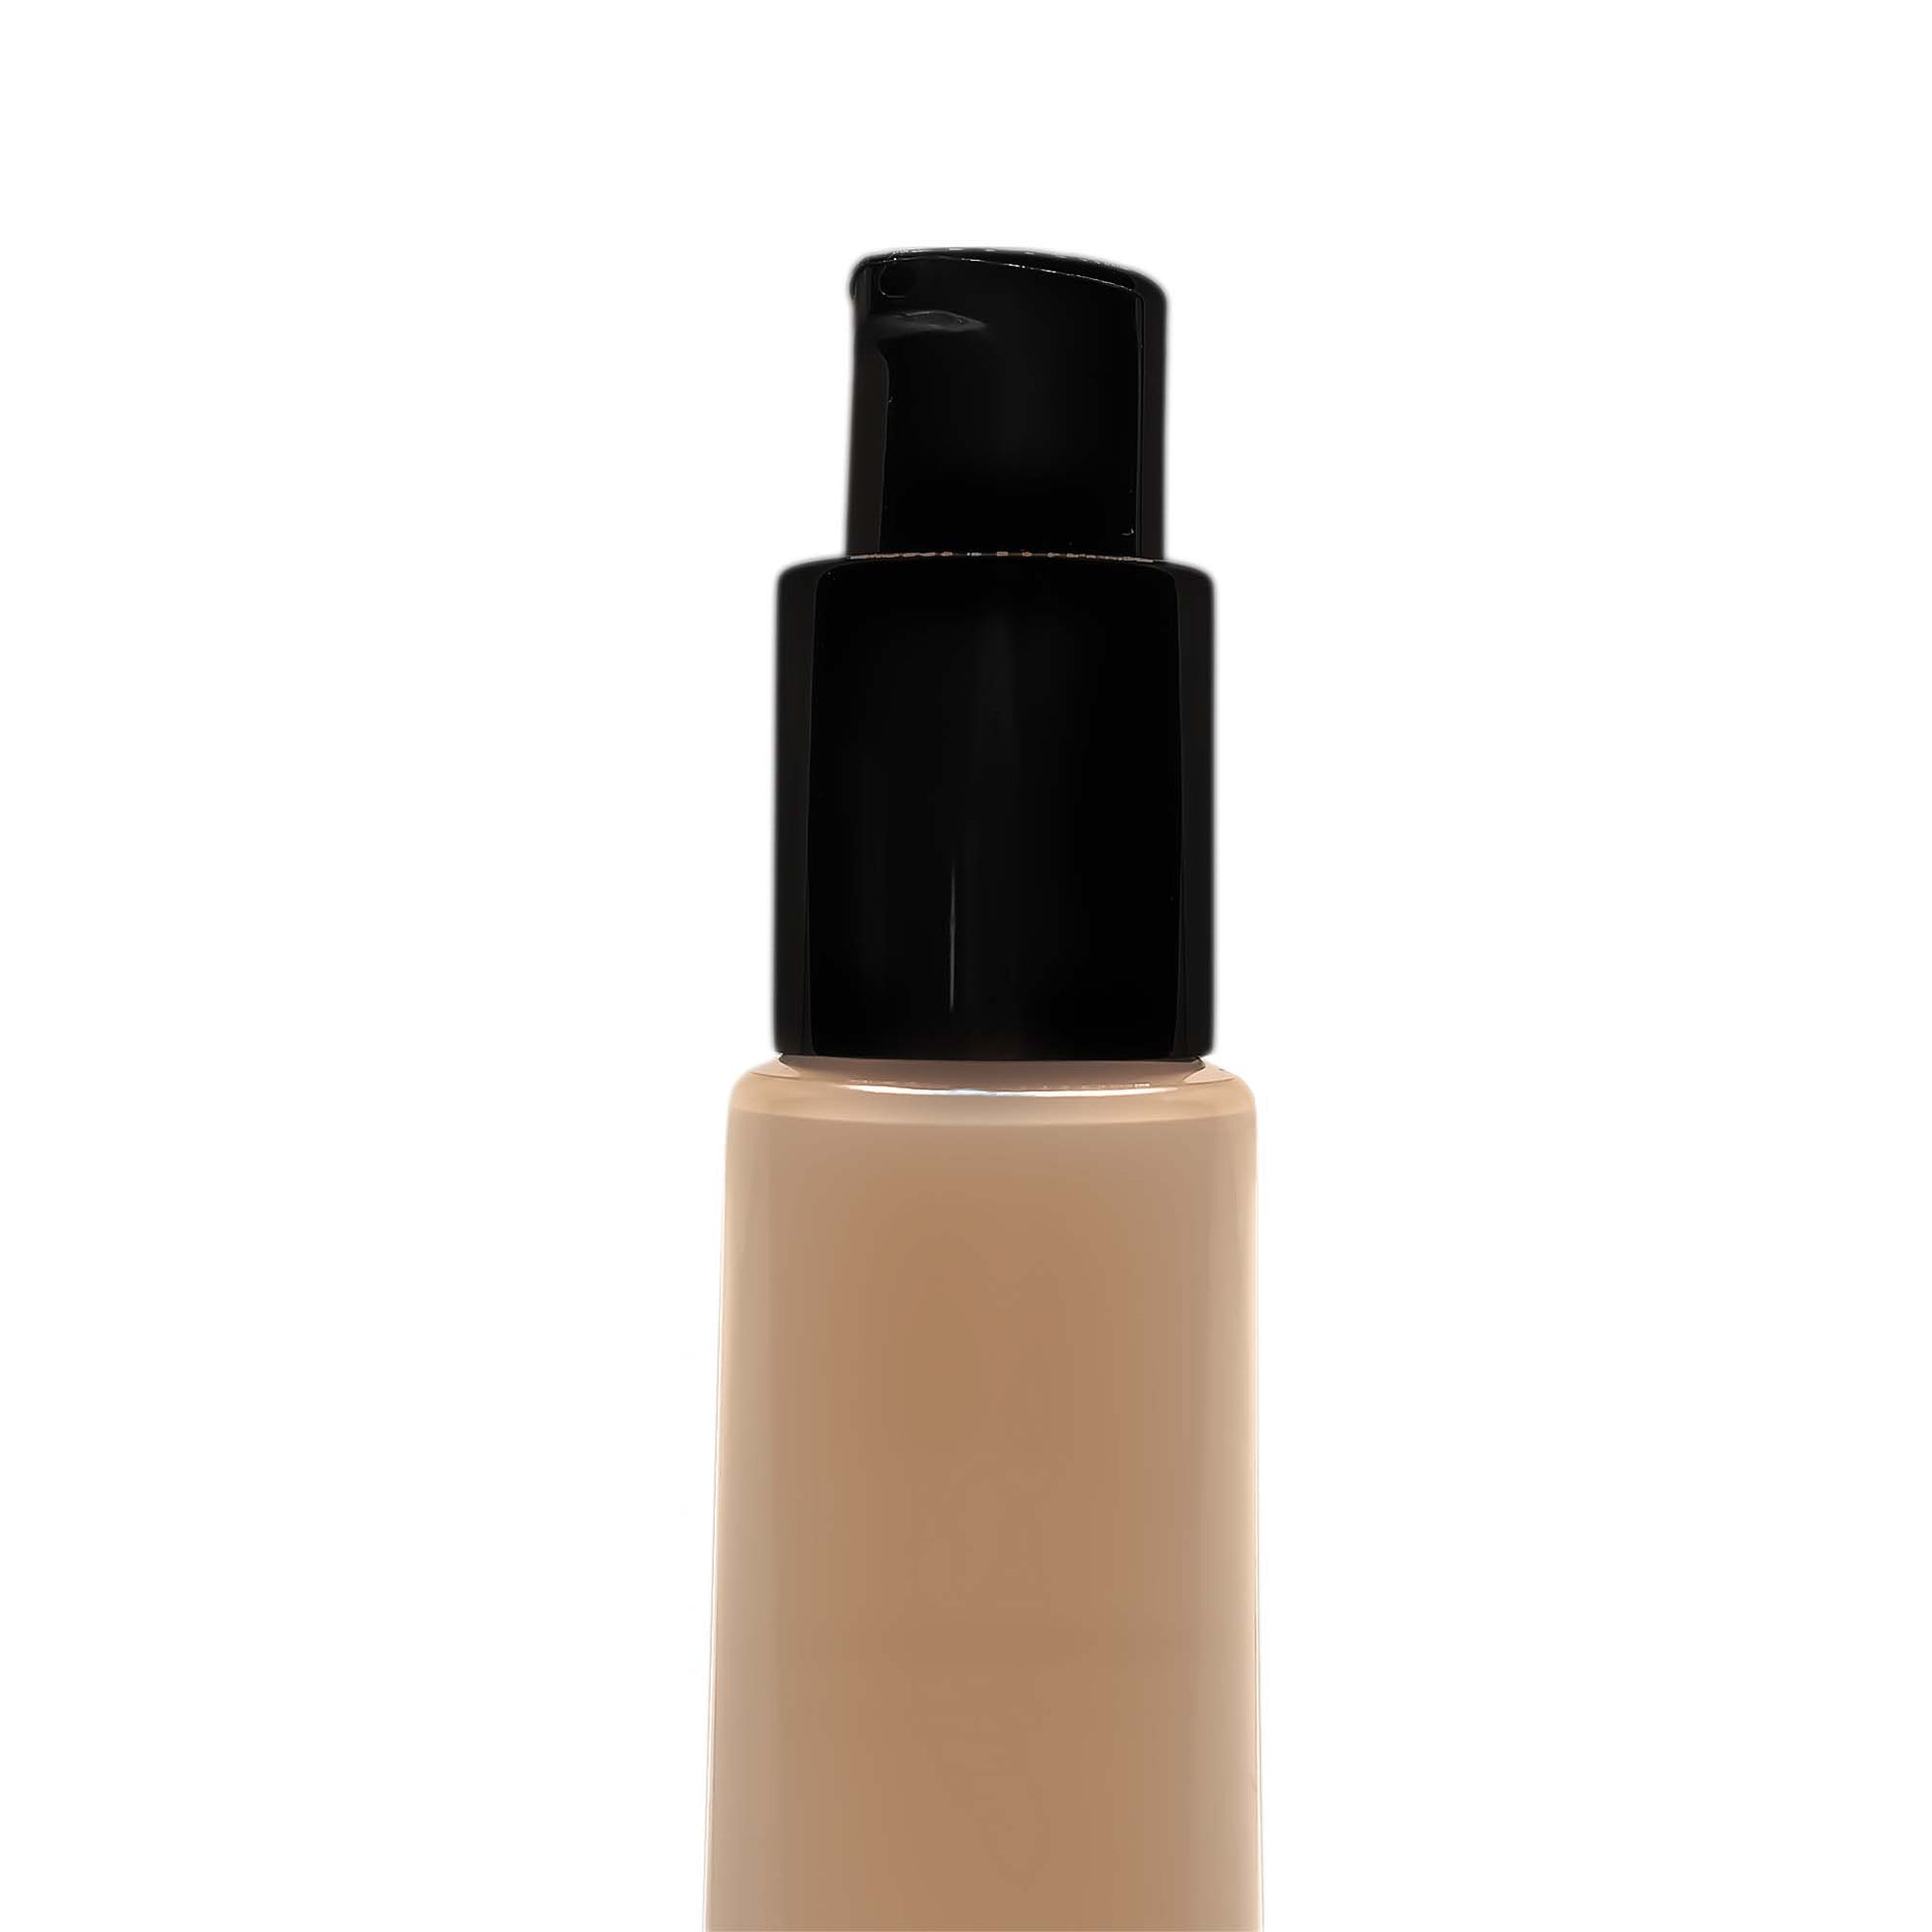 Full Cover Foundation - Sable sakkstyles.com